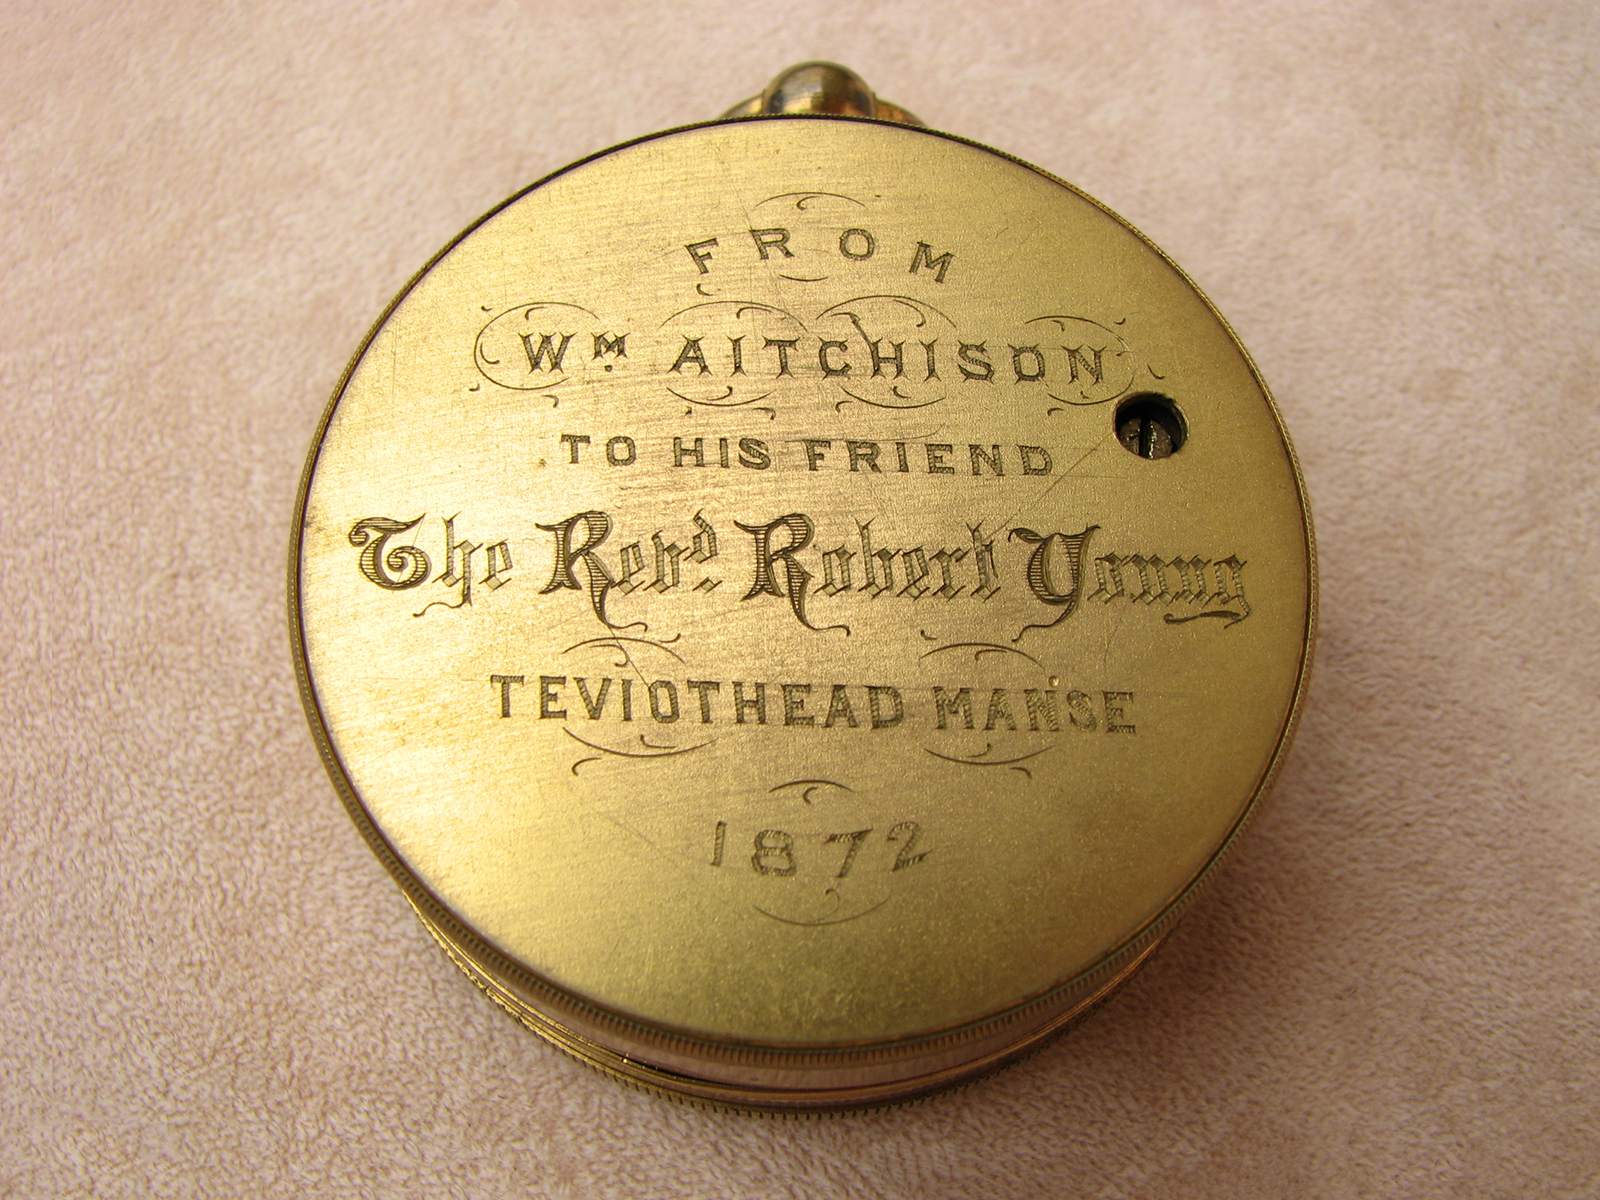 Antique pocket barometer owned by Rev'd Robert Young, publisher of Youngs Literal Translation, dated 1872